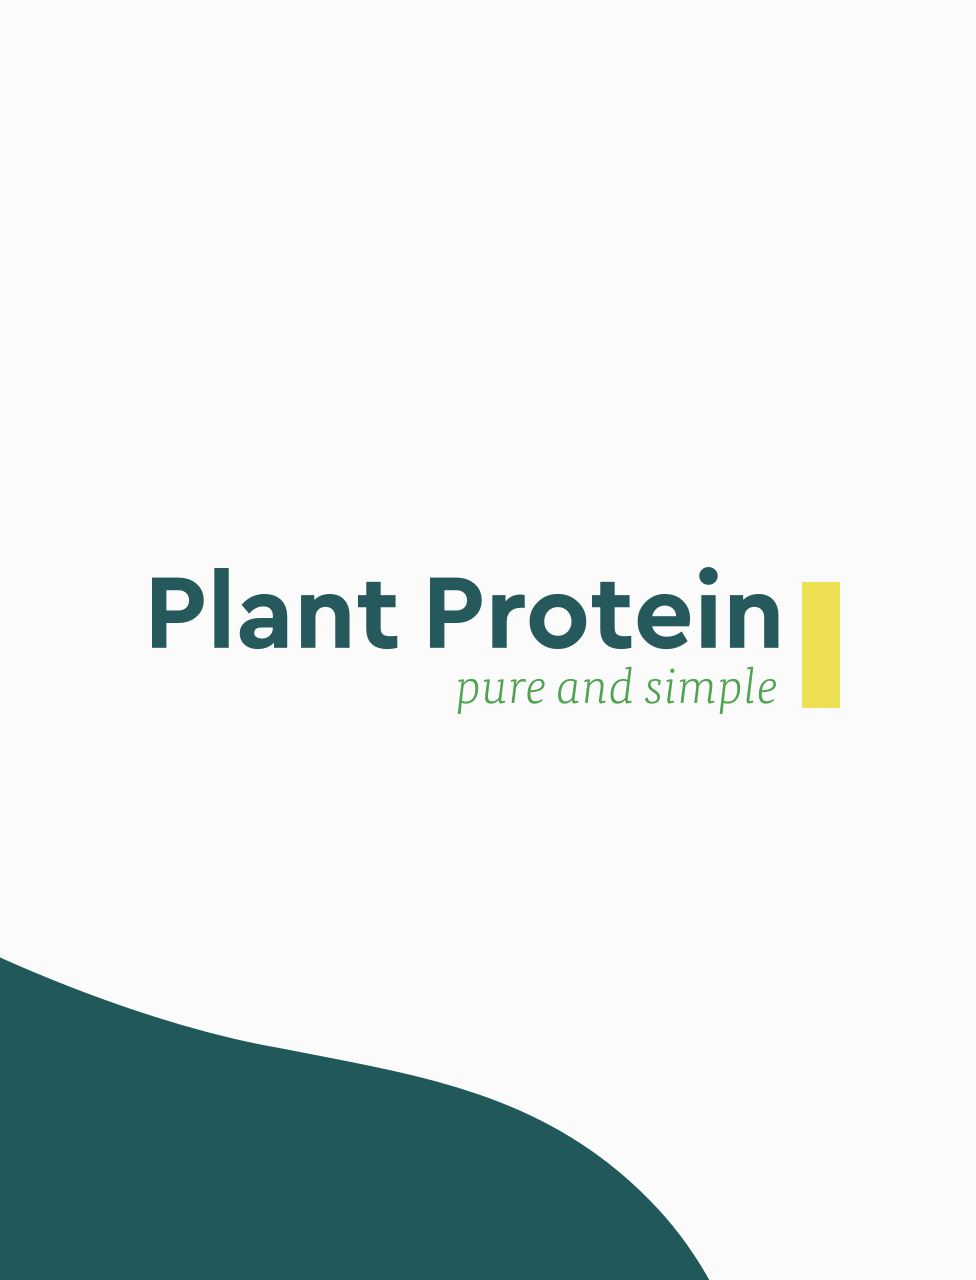 Plant Protein pure and simple - functional foods